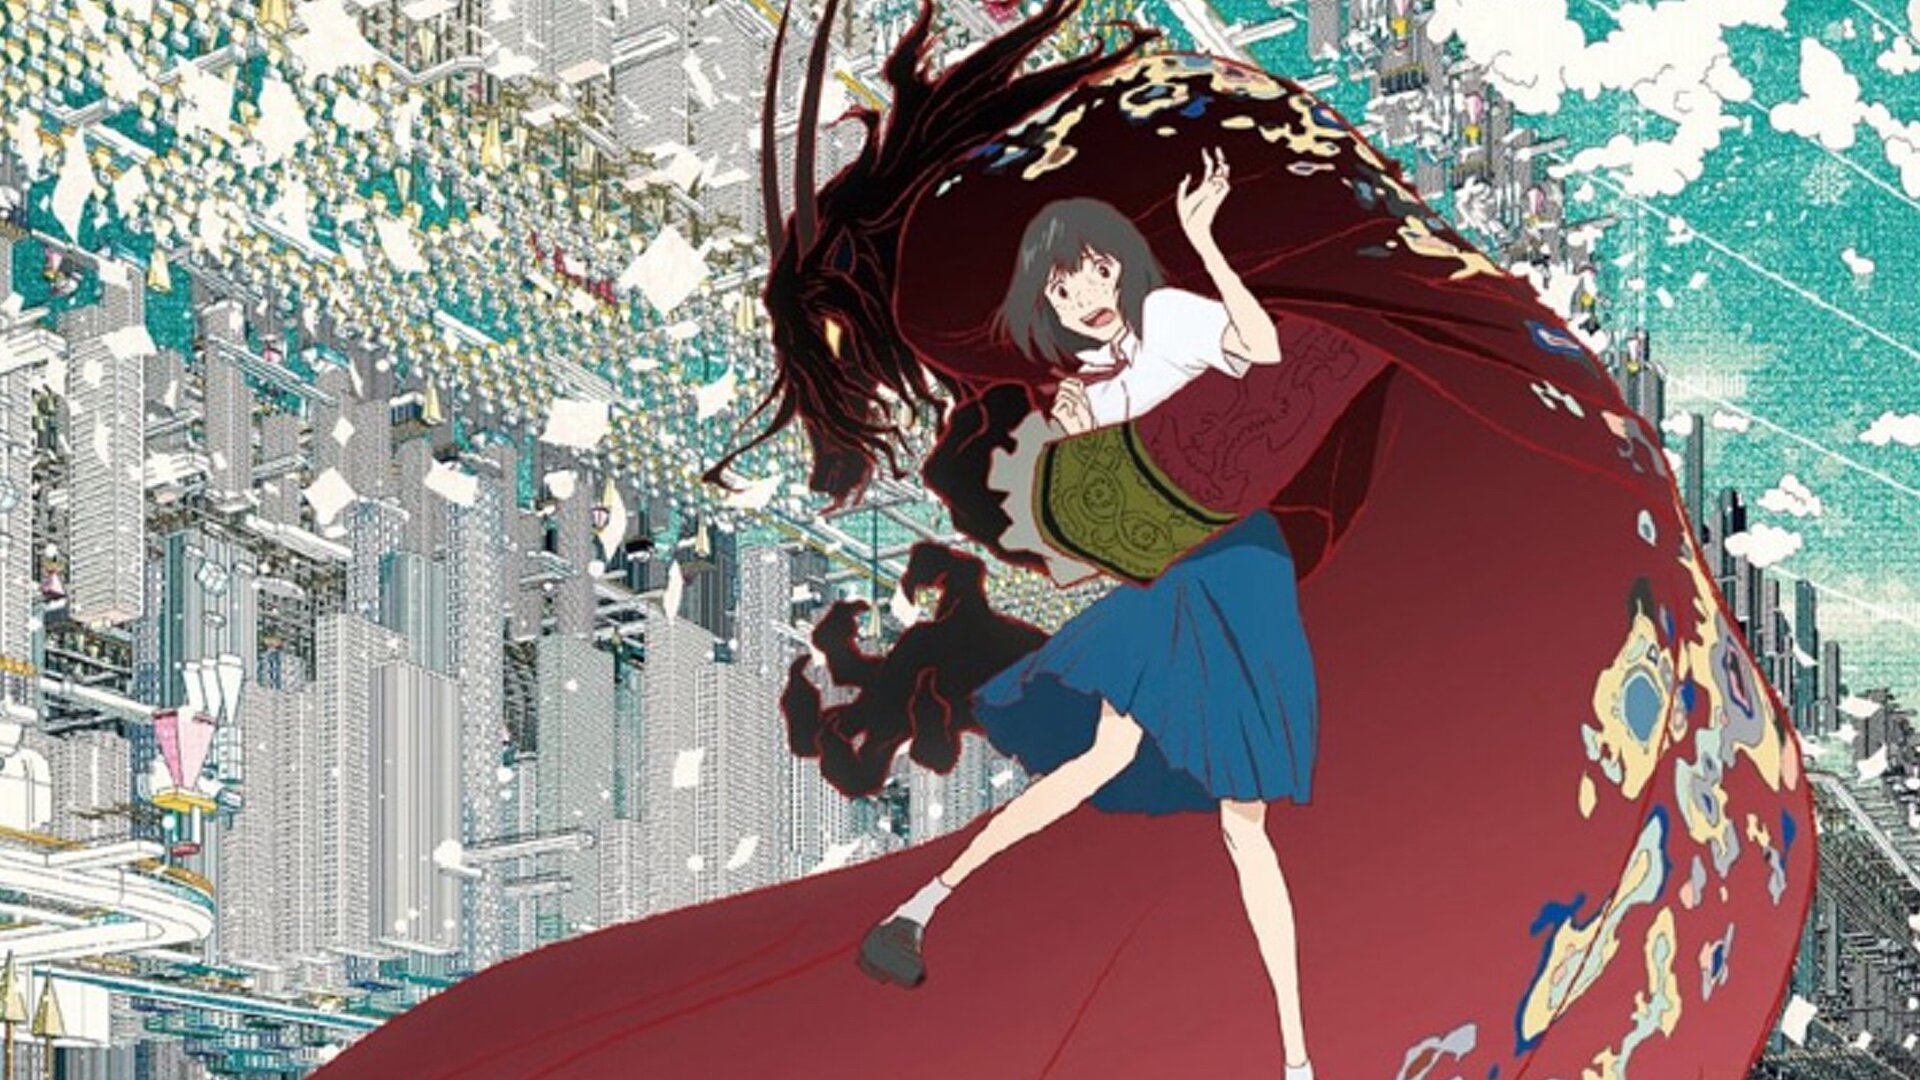 First Teaser for Mamoru Hosoda's Belle Enters a Virtual World